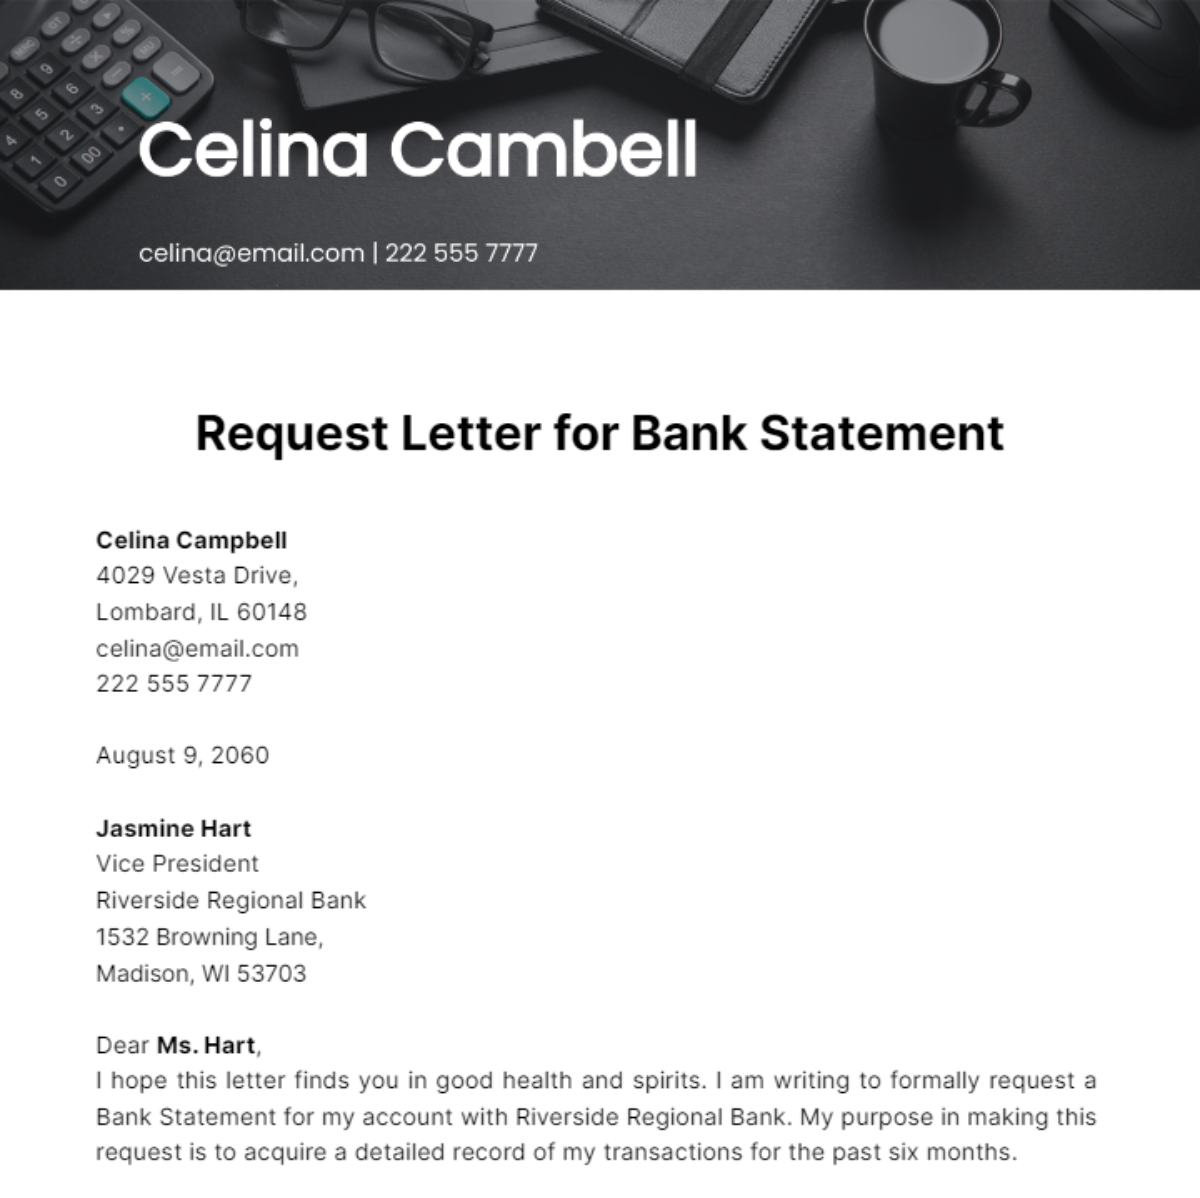 Request Letter for Bank Statement  Template